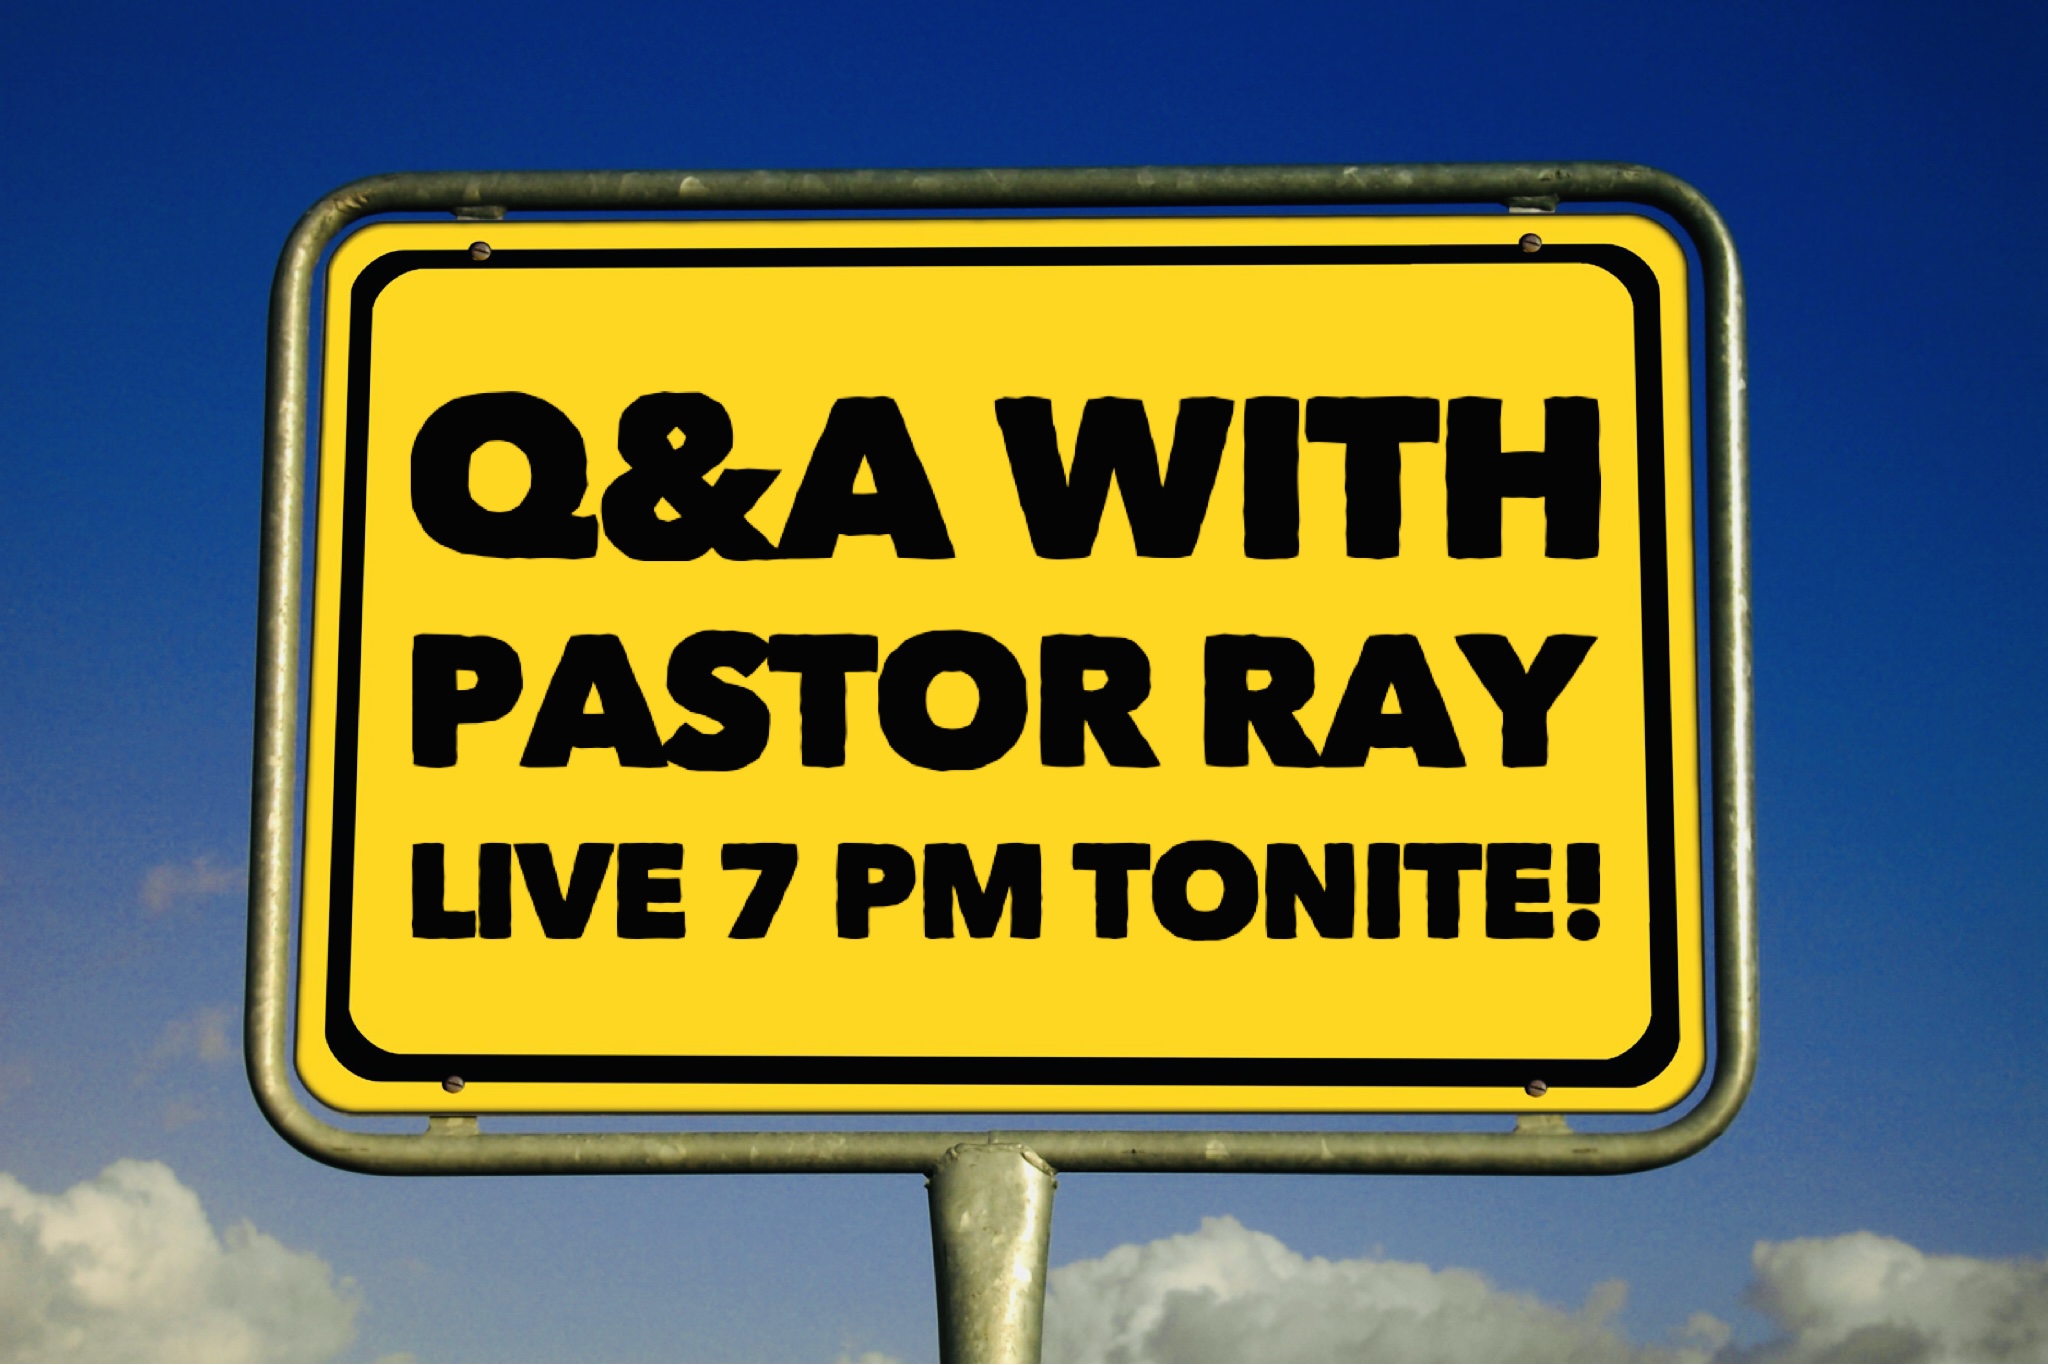 Watch the Q&A Tonight at 7 PM!